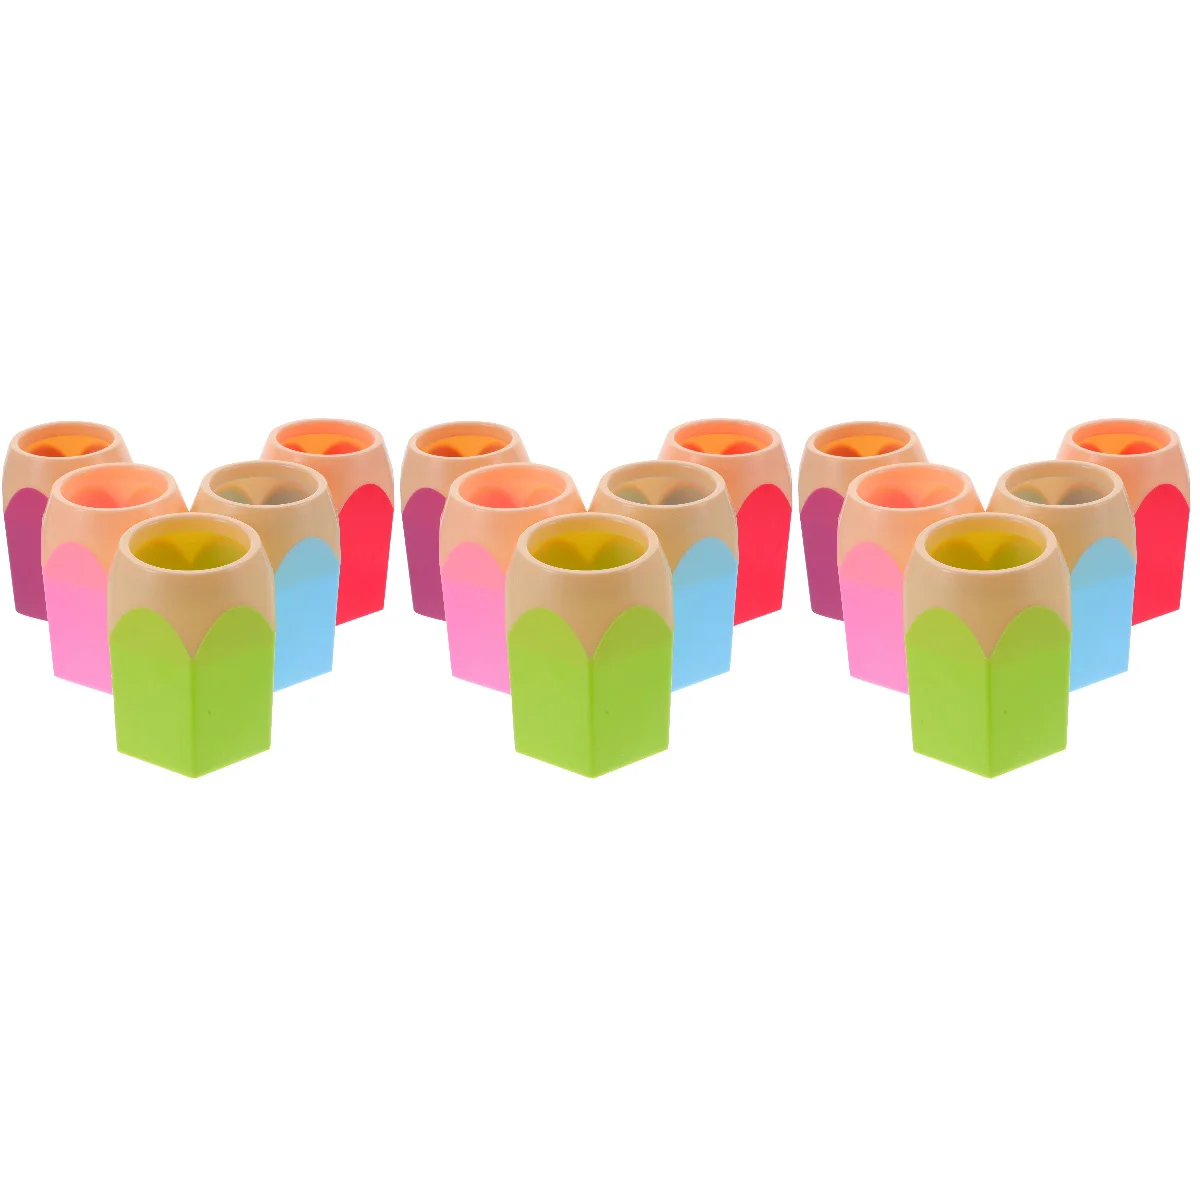 

15 Pcs Color Contrast Pen Holder Colored Vasess Kids Holders Straws Organizer Storage Tool Containers Dispenser Classroom